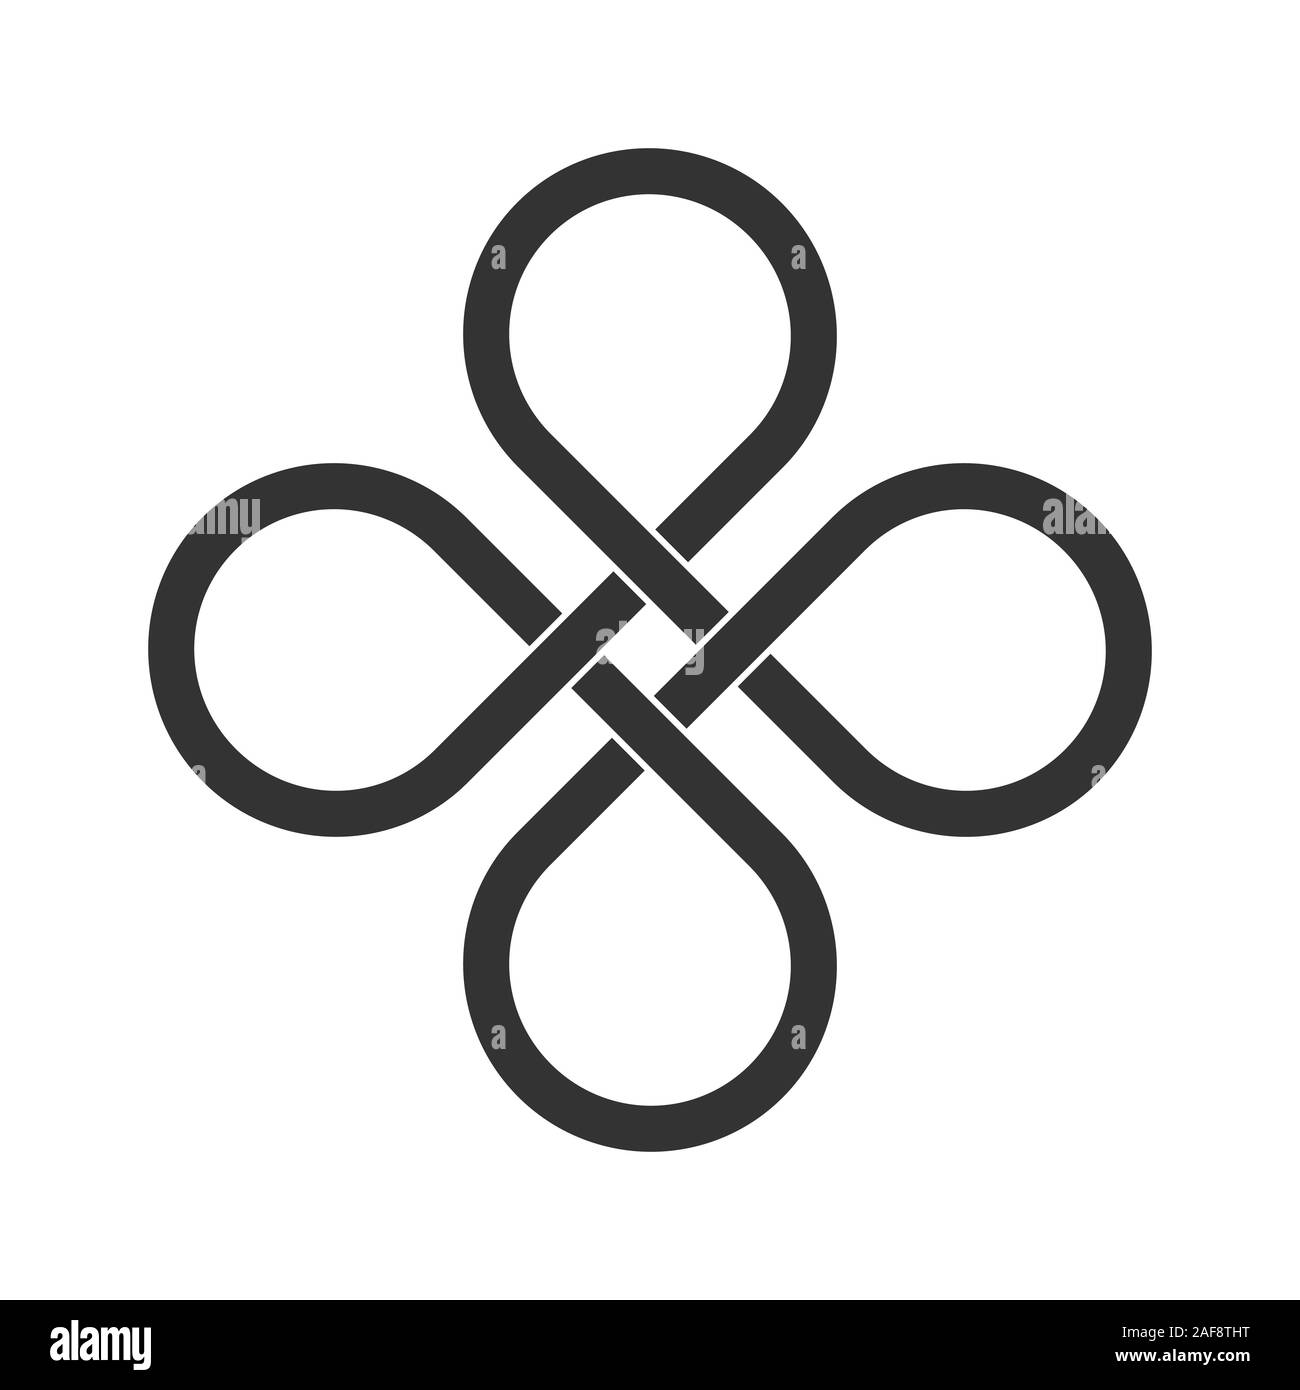 Infinite loop icon. Clover leaf knot. Endless loop sign. Celtic interlocking knot. Old ornament strip. Eternity line. Interconnected circular shapes. Stock Vector